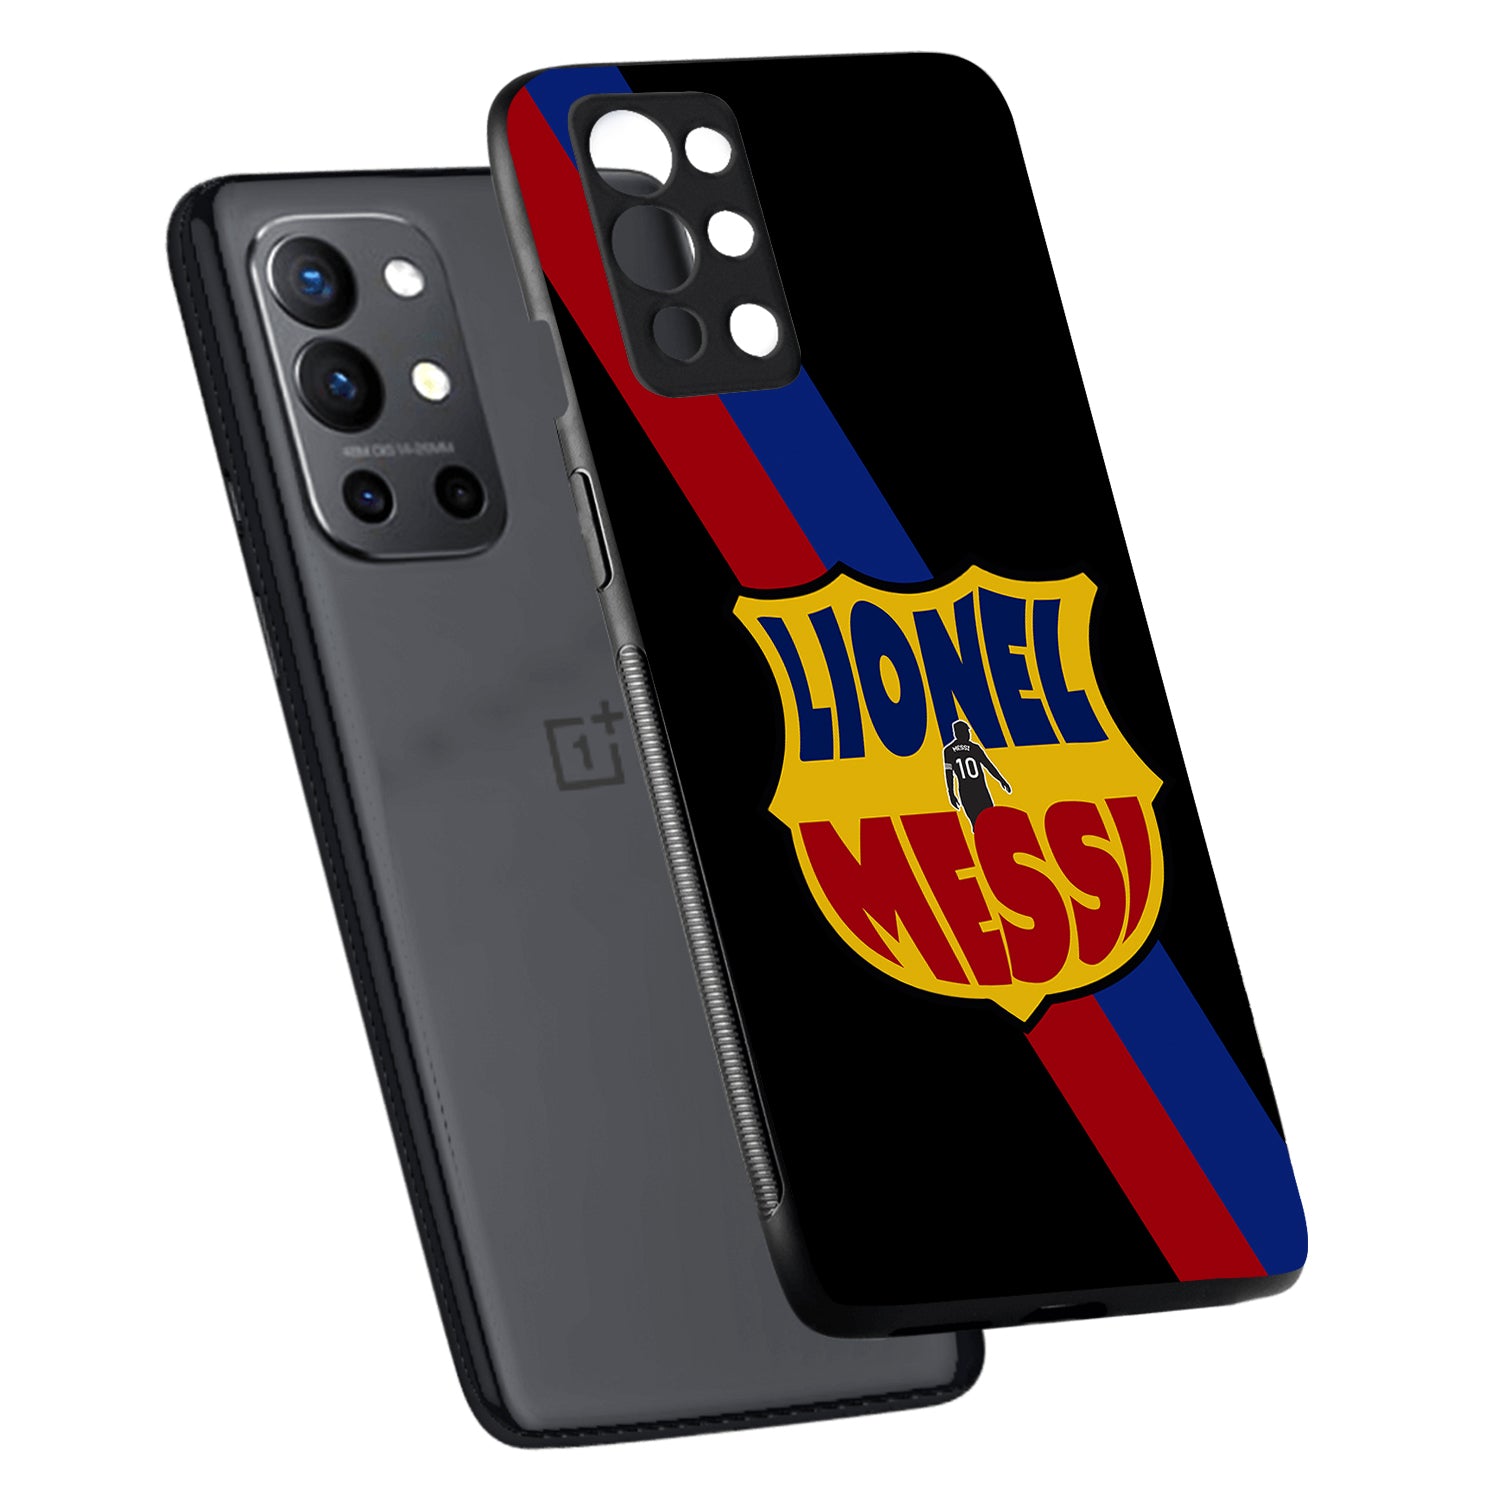 Lionel Messi Sports Oneplus 9 pro Back Case